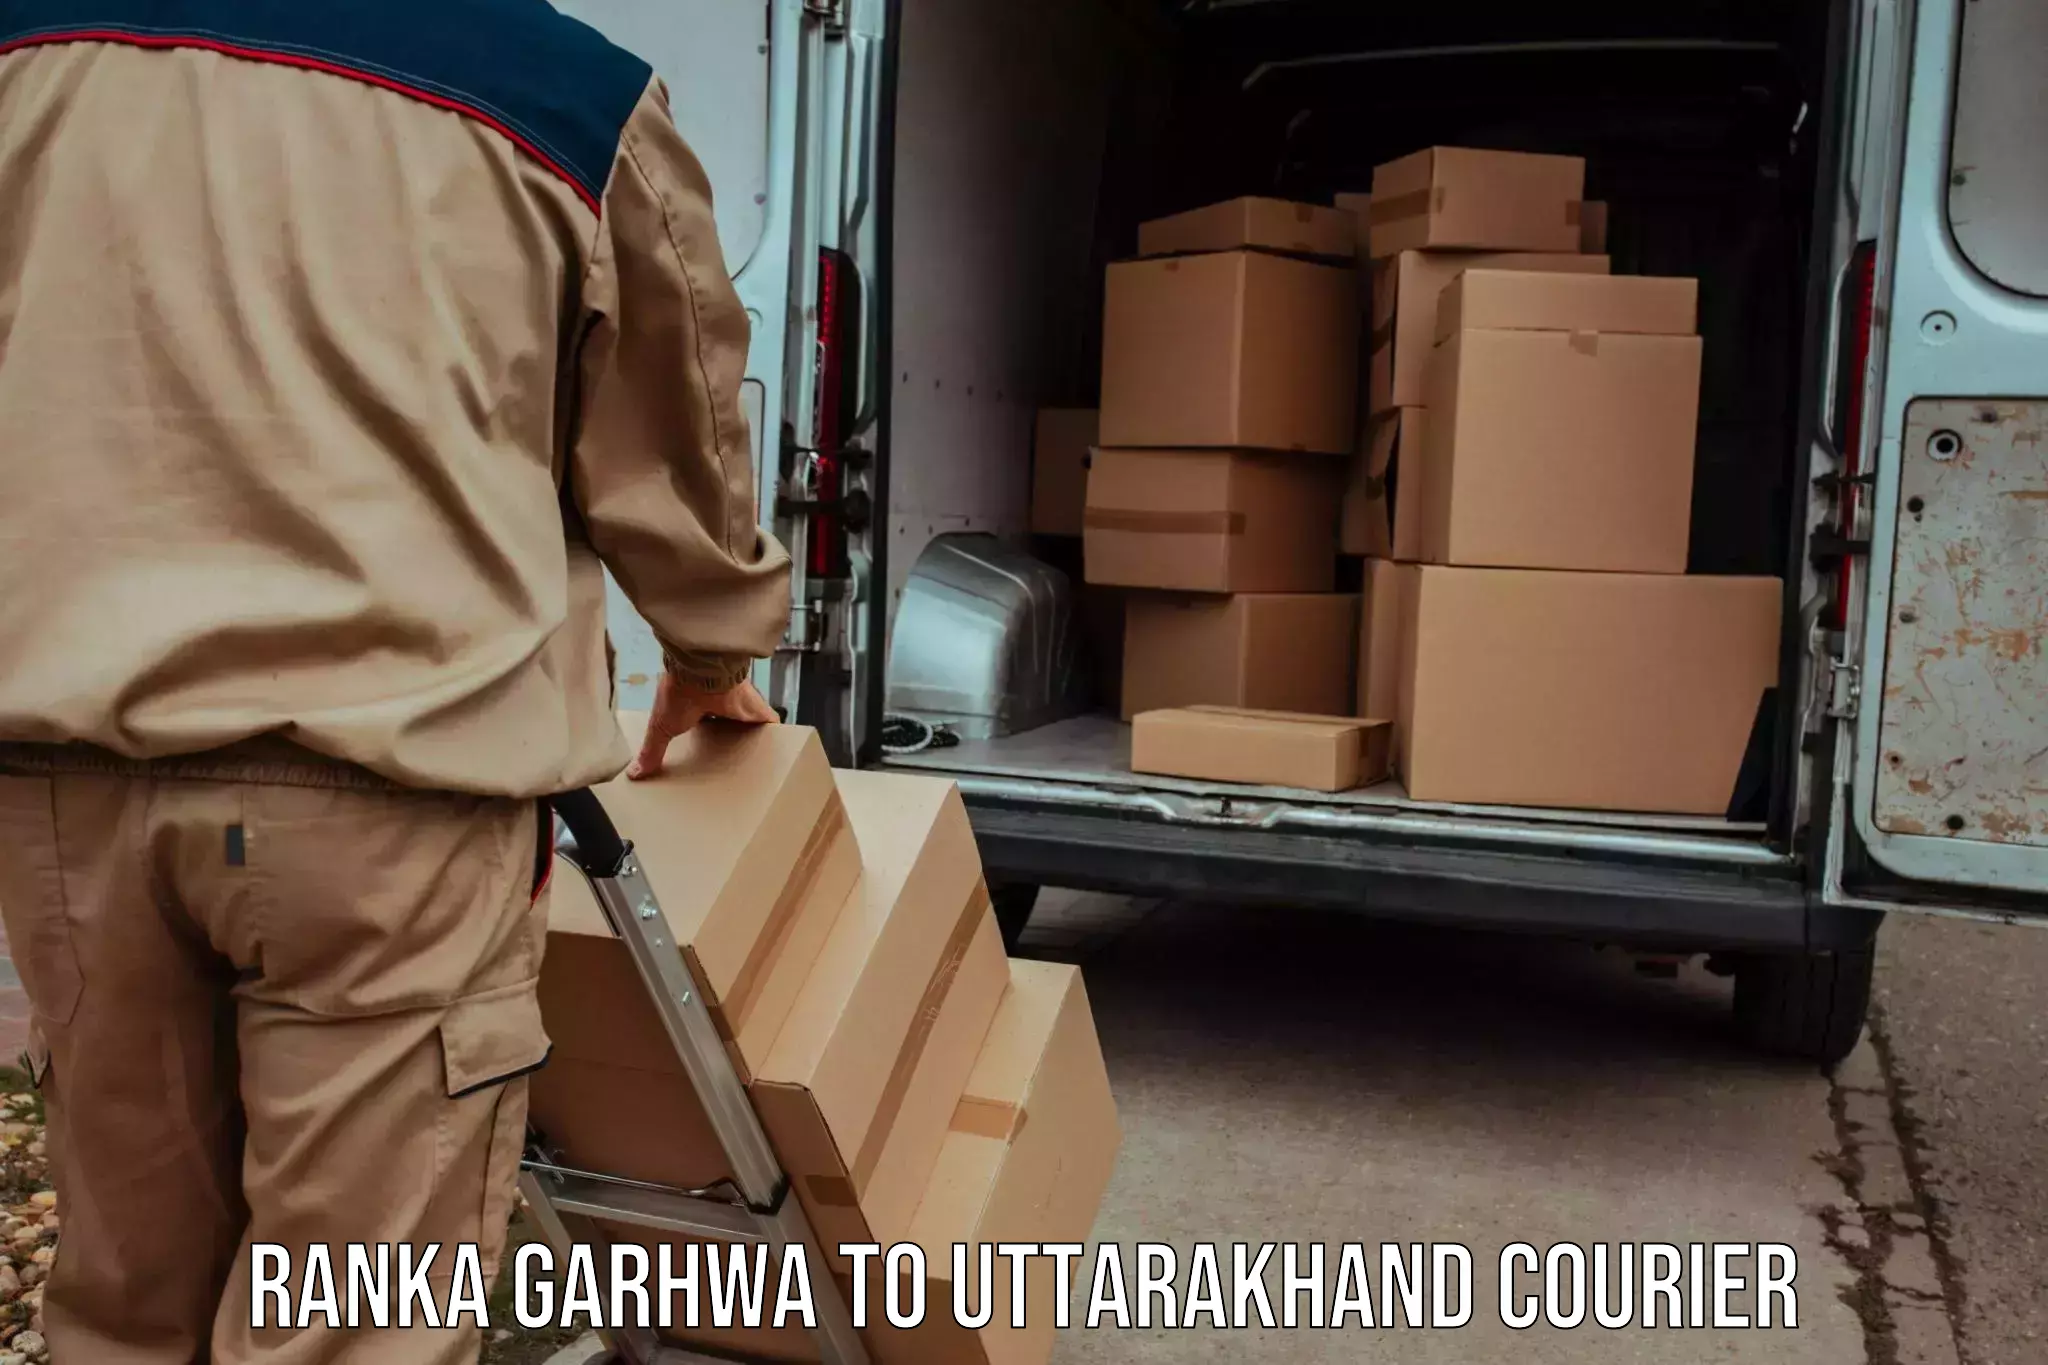 Personal courier services in Ranka Garhwa to Baijnath Bageshwar